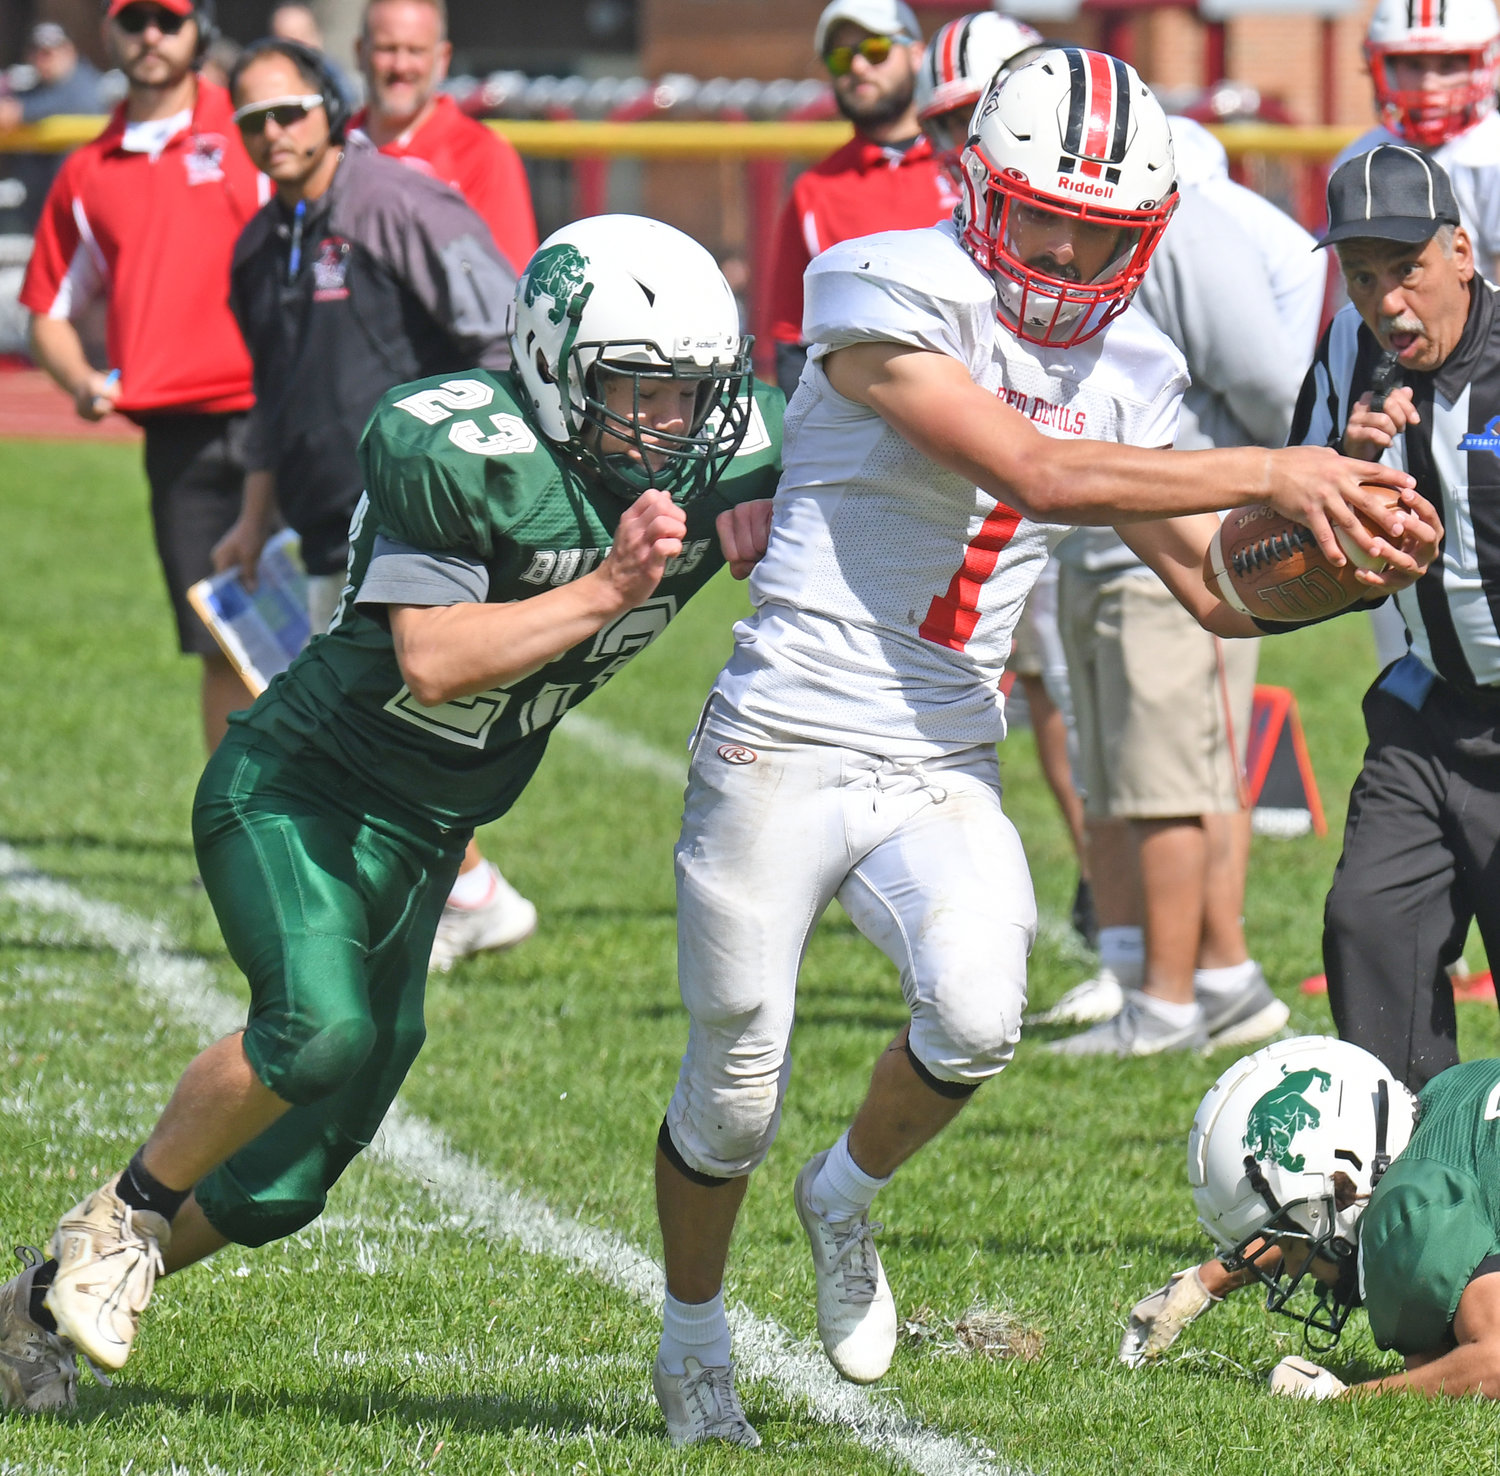 Vernon-Verona-Sherrill's James Wheeler IV tip-toes down the sideline and stretches his arms out with the ball to pick up a first down as Westmoreland/Oriskany's Max Janczewski gets set to push him out of bounds on Saturday afternoon at Bernie Block Field in Oriskany. Wheeler rushed for 199 yards on 15 carries and scored three touchdowns as the Red Devils won 49-14.